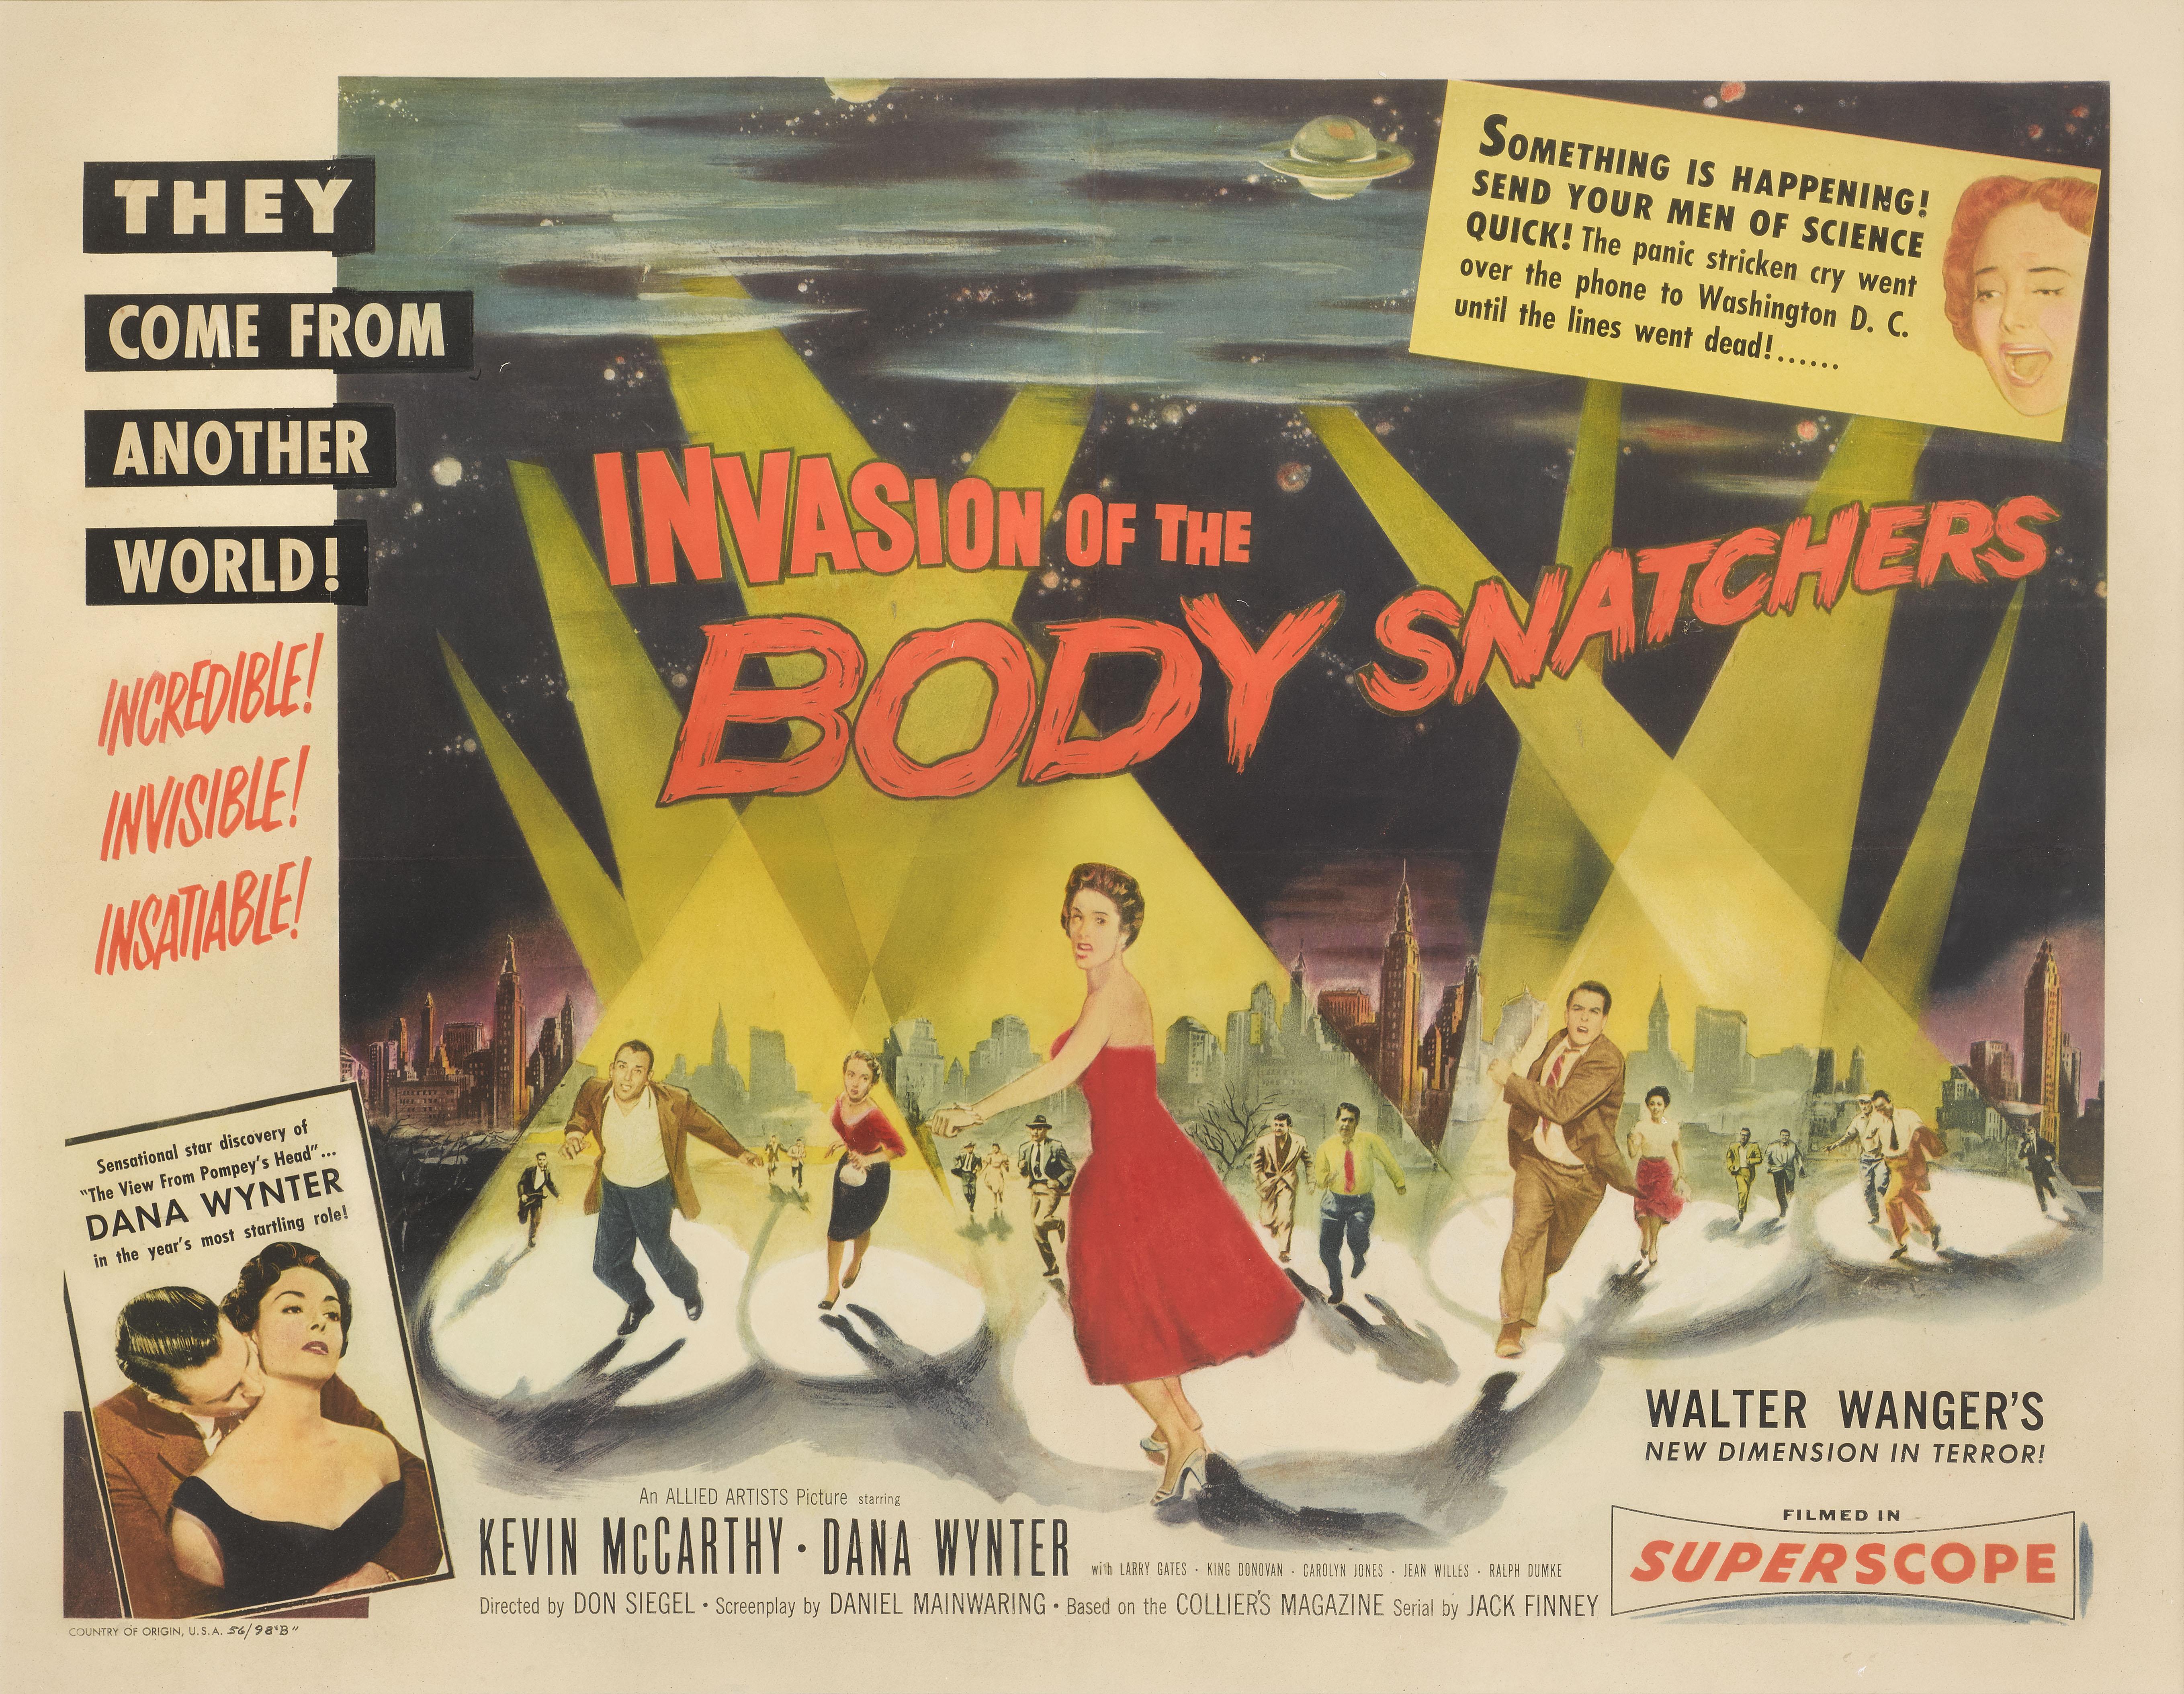 Original American film poster for the 1956 science fiction horror film Invasion of the Body Snatchers.
This is the hardest to find and very best poster on the title.
This film projected a sophistication and subtlety missing in more gung-ho gore